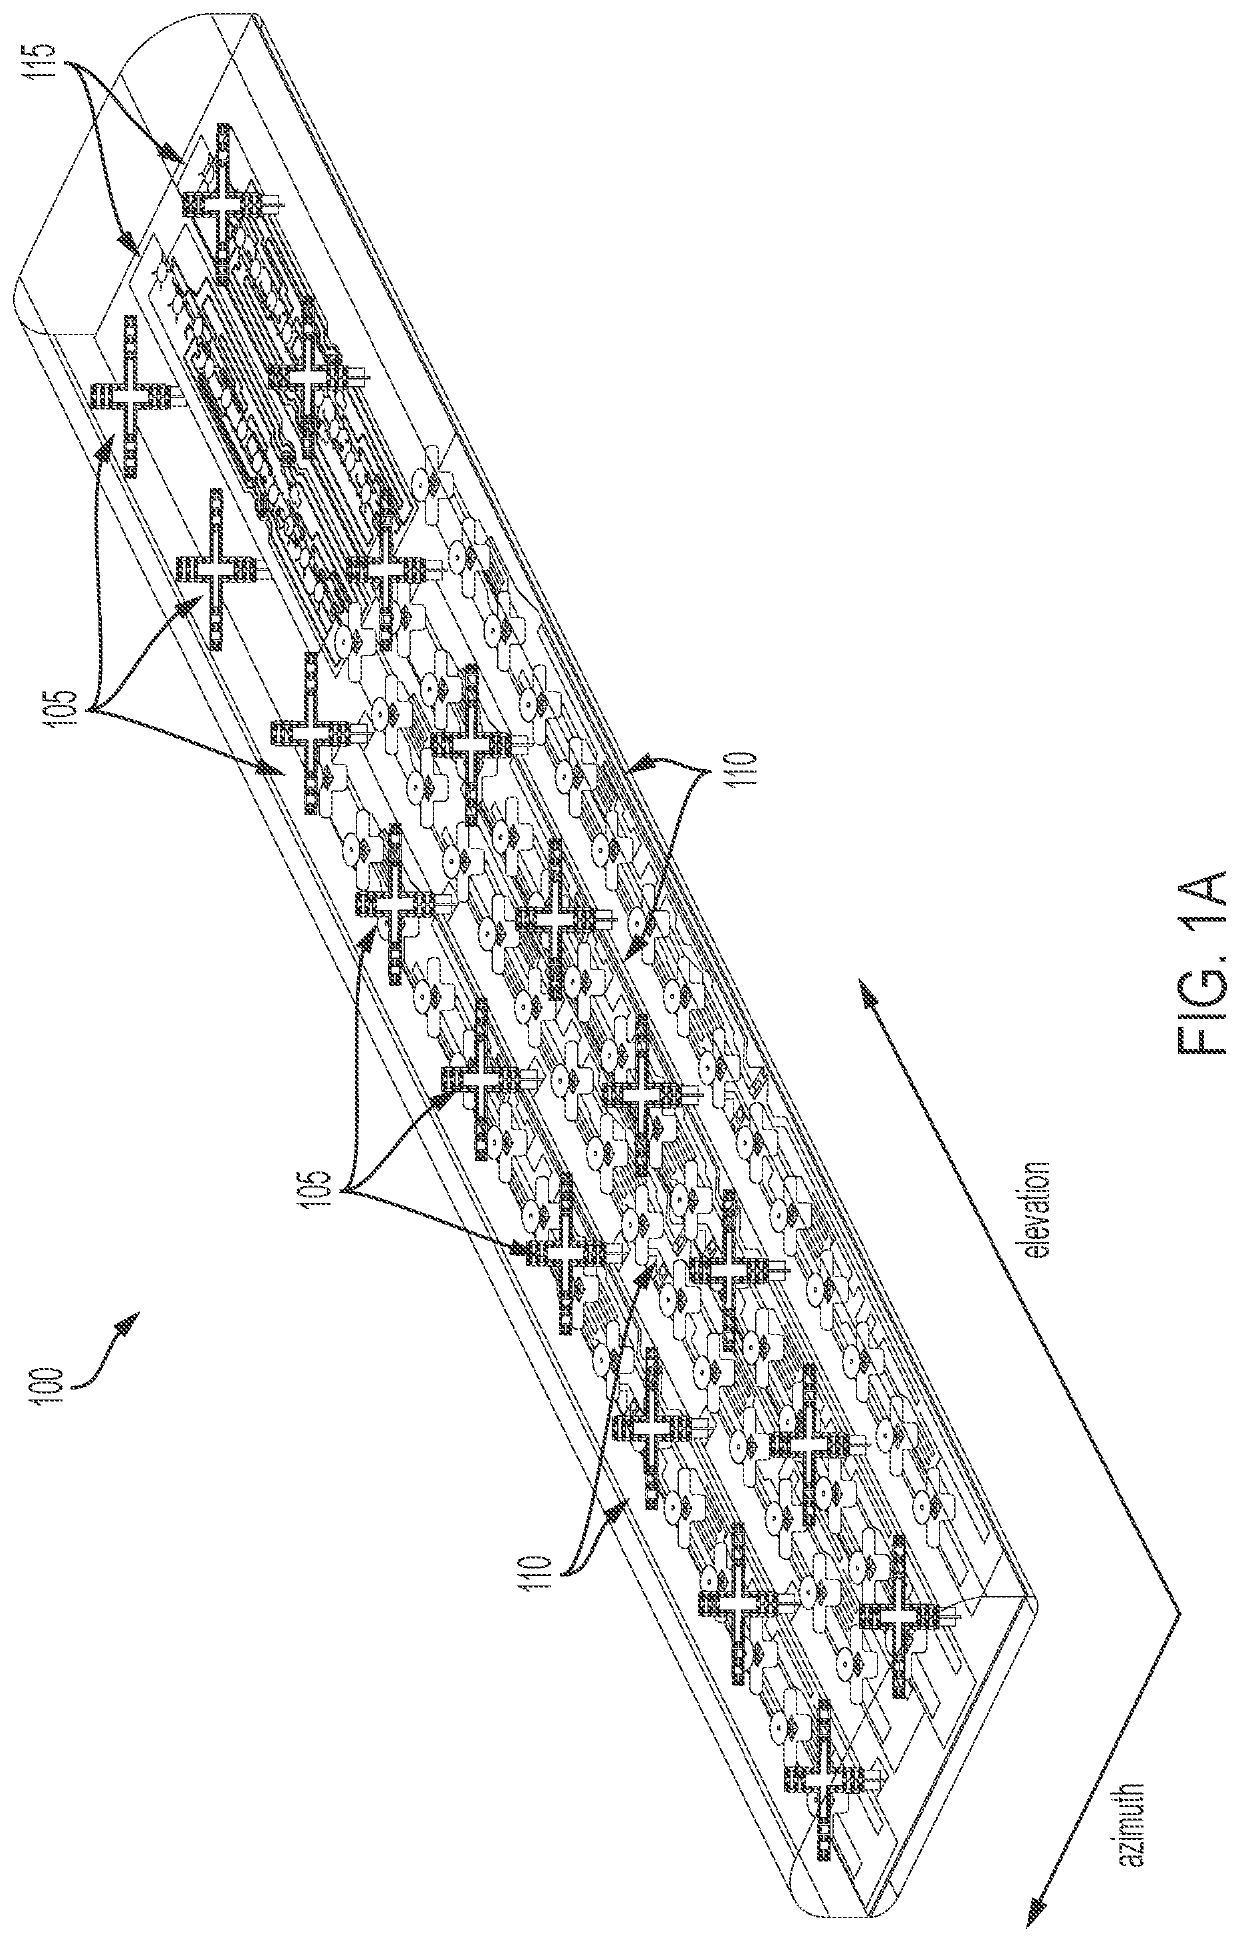 Antenna Radiator with Pre-Configured Cloaking to Enable Dense Placement of Radiators of Multiple Bands